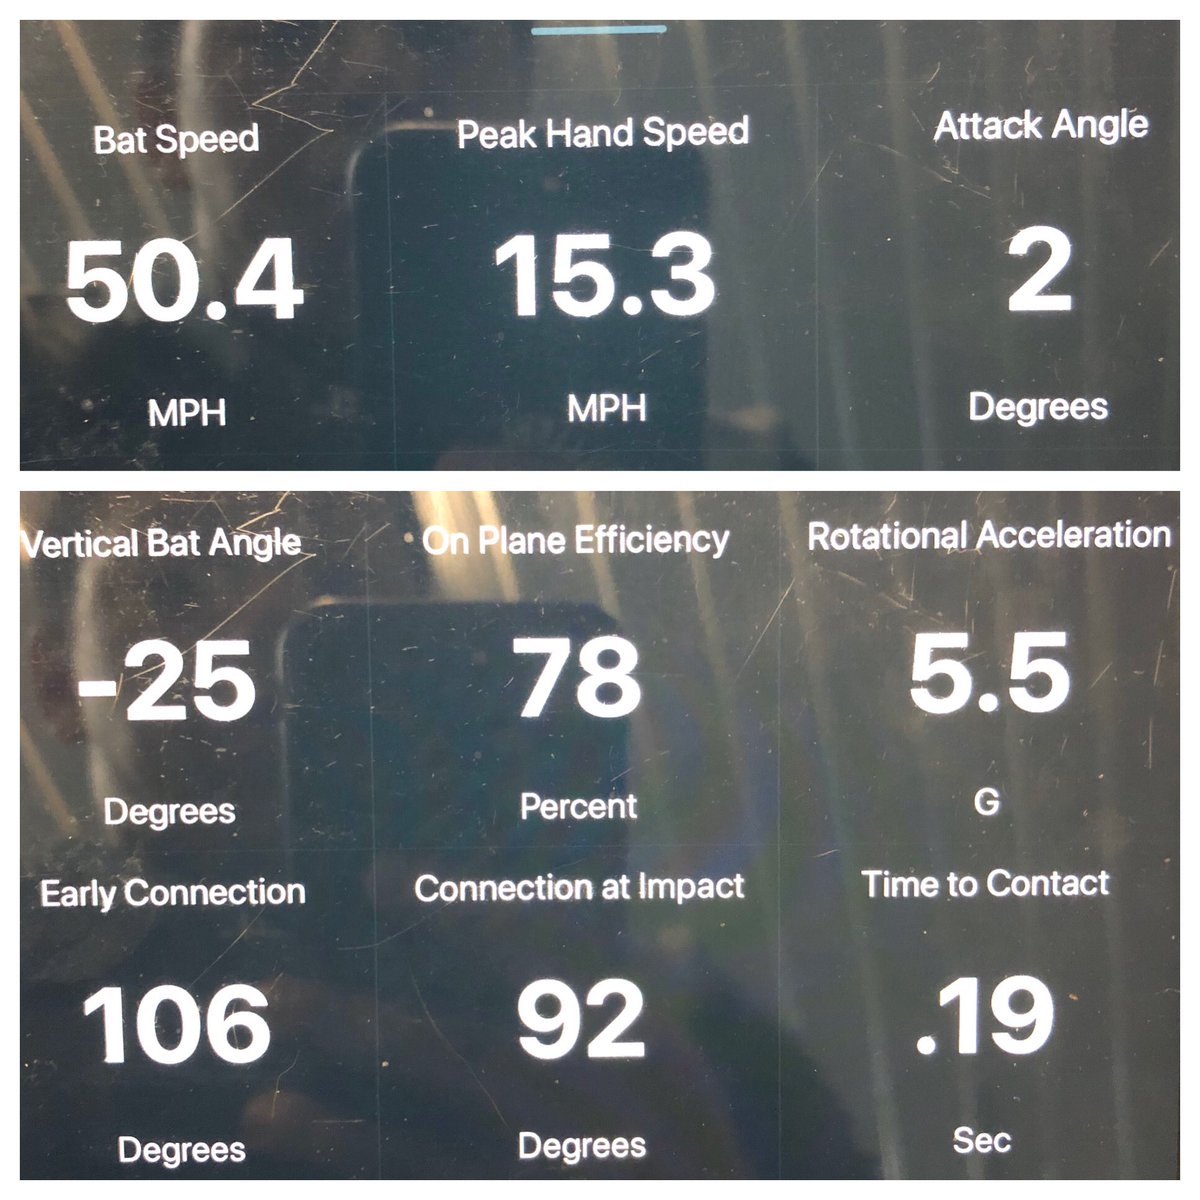 do well. For example, a player might have a killer bat speed, but a slow time to contact. Another might have great rotational acceleration and TTC, but a slower bat speed. If we know what these metrics mean, we can train a player individually. If a player is fast (bat speed), 4/